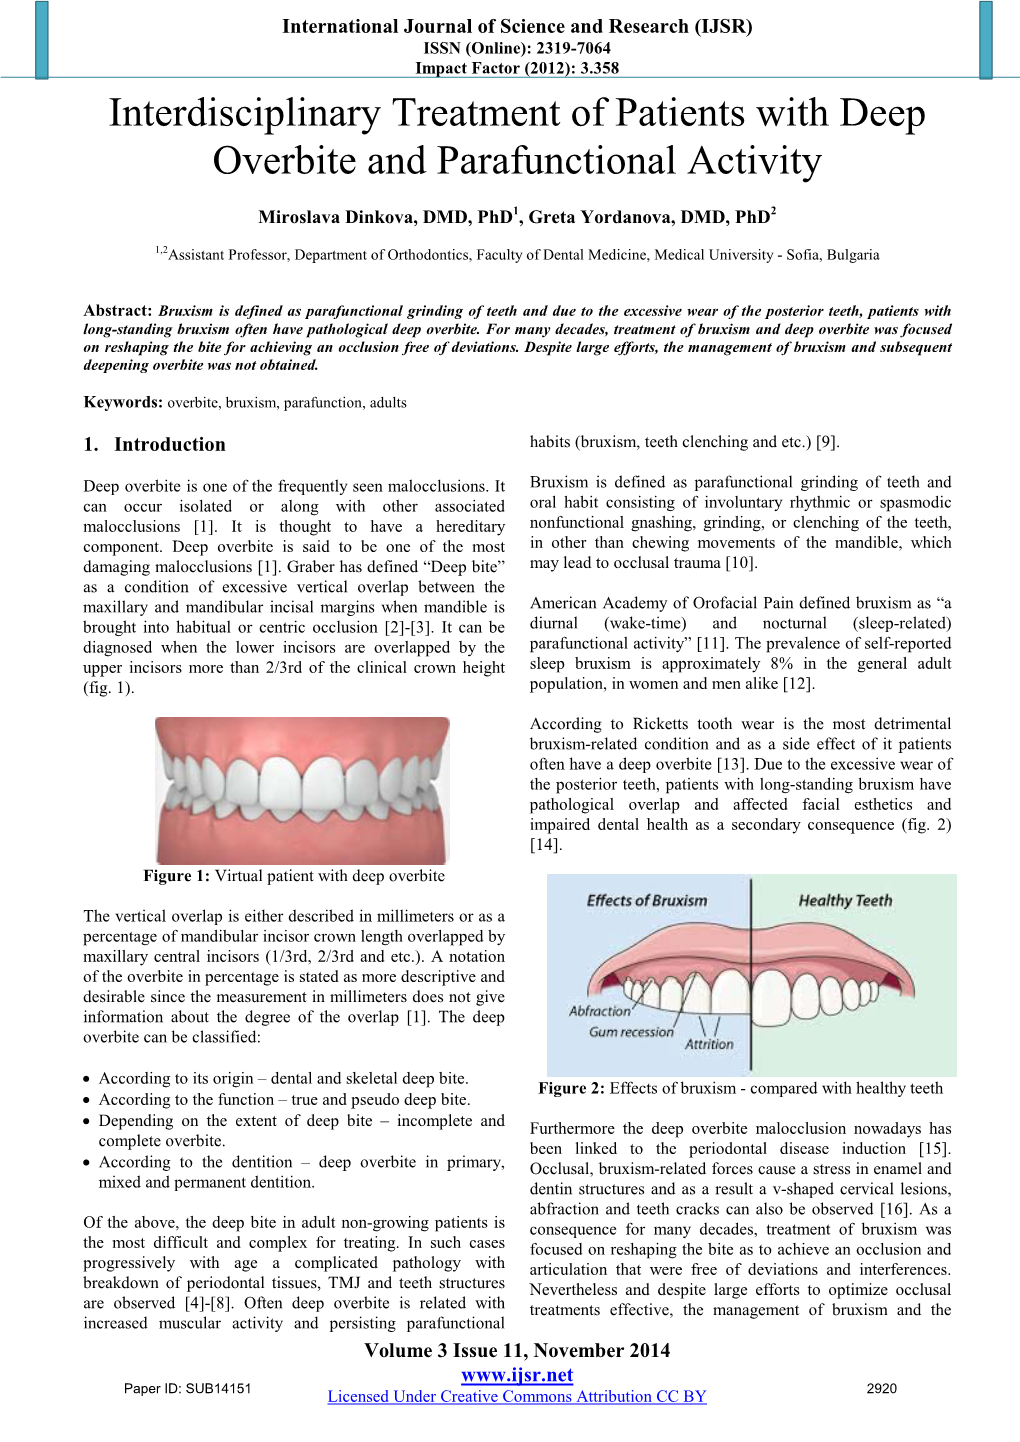 Interdisciplinary Treatment of Patients with Deep Overbite and Parafunctional Activity